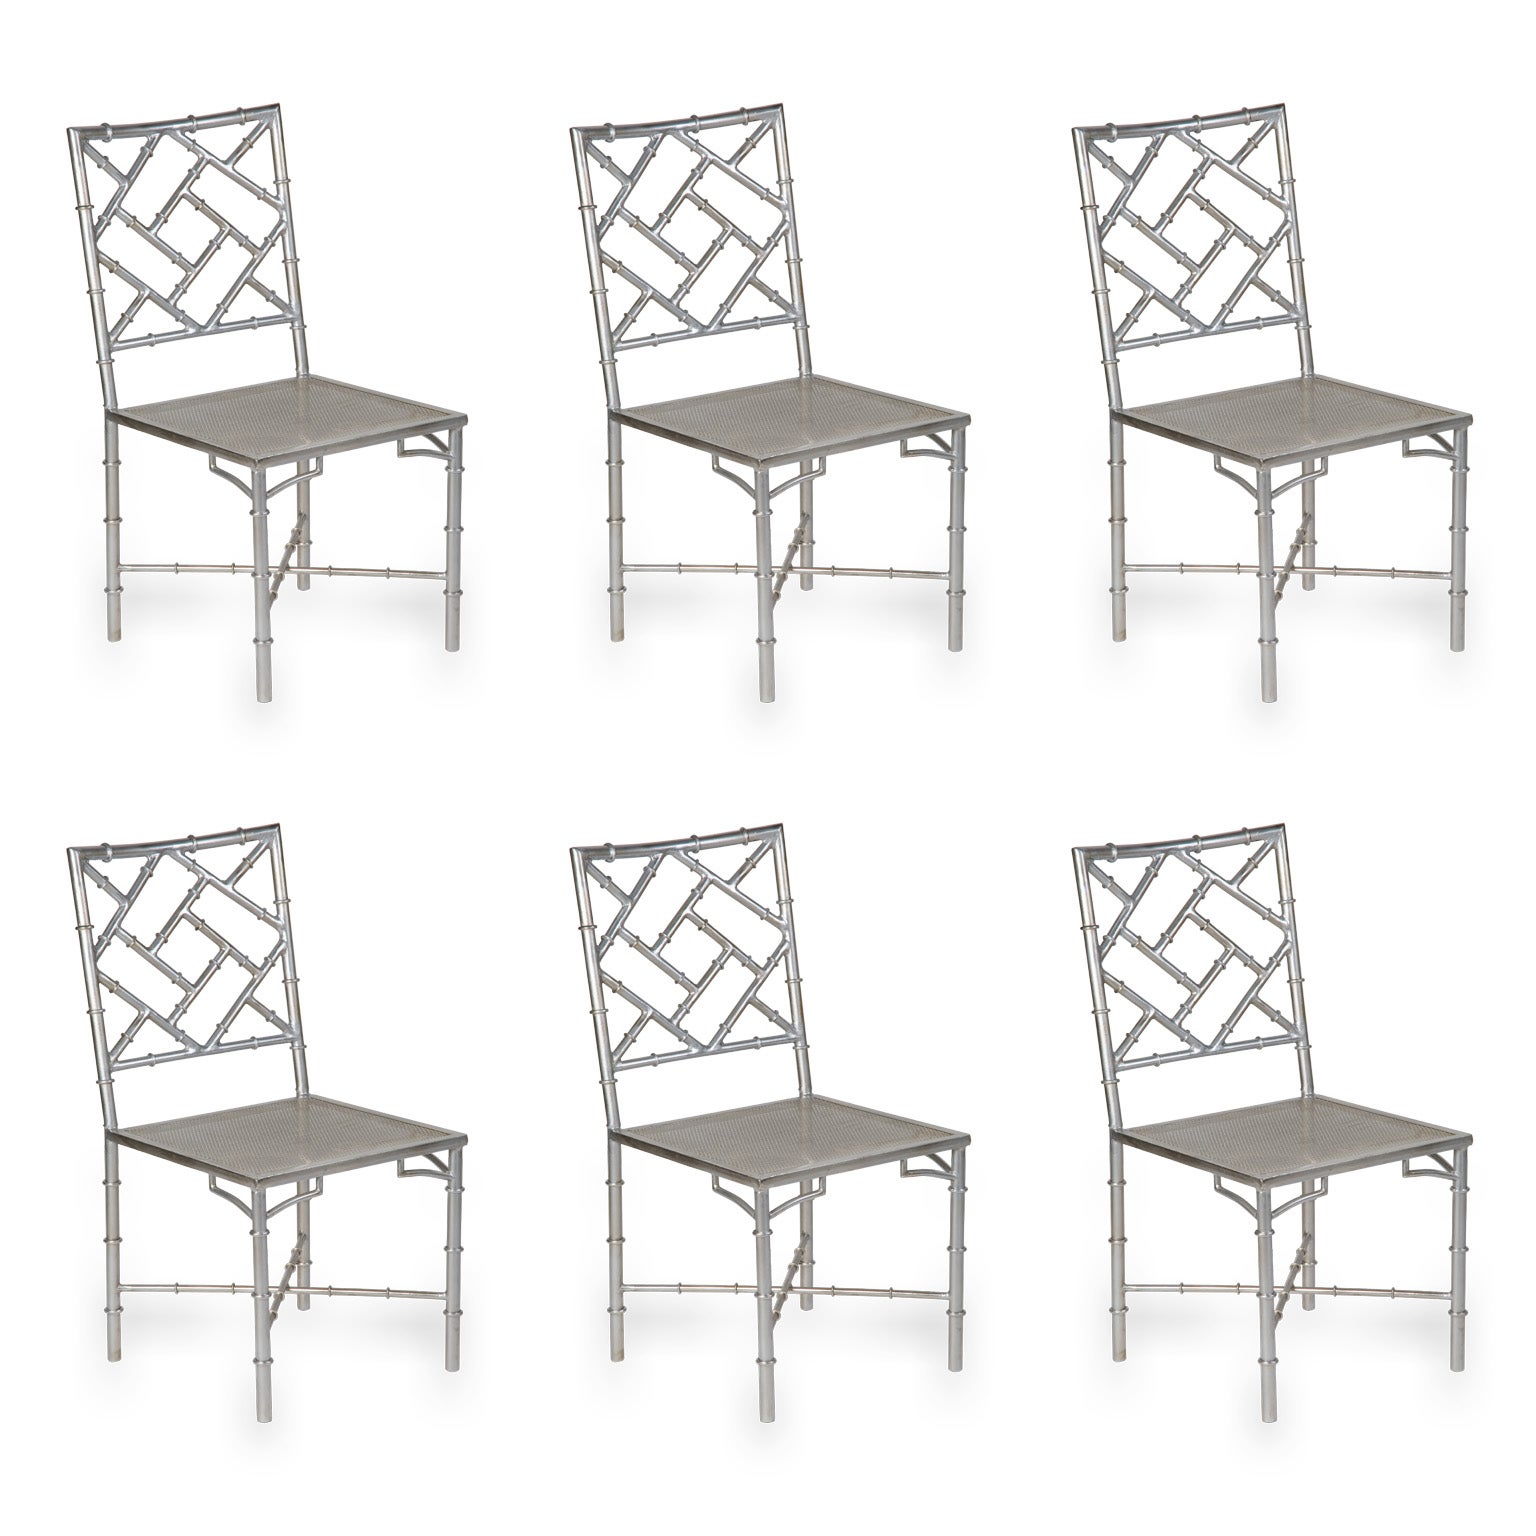 Set 6 Large Scale Faux Bamboo Metal Chairs